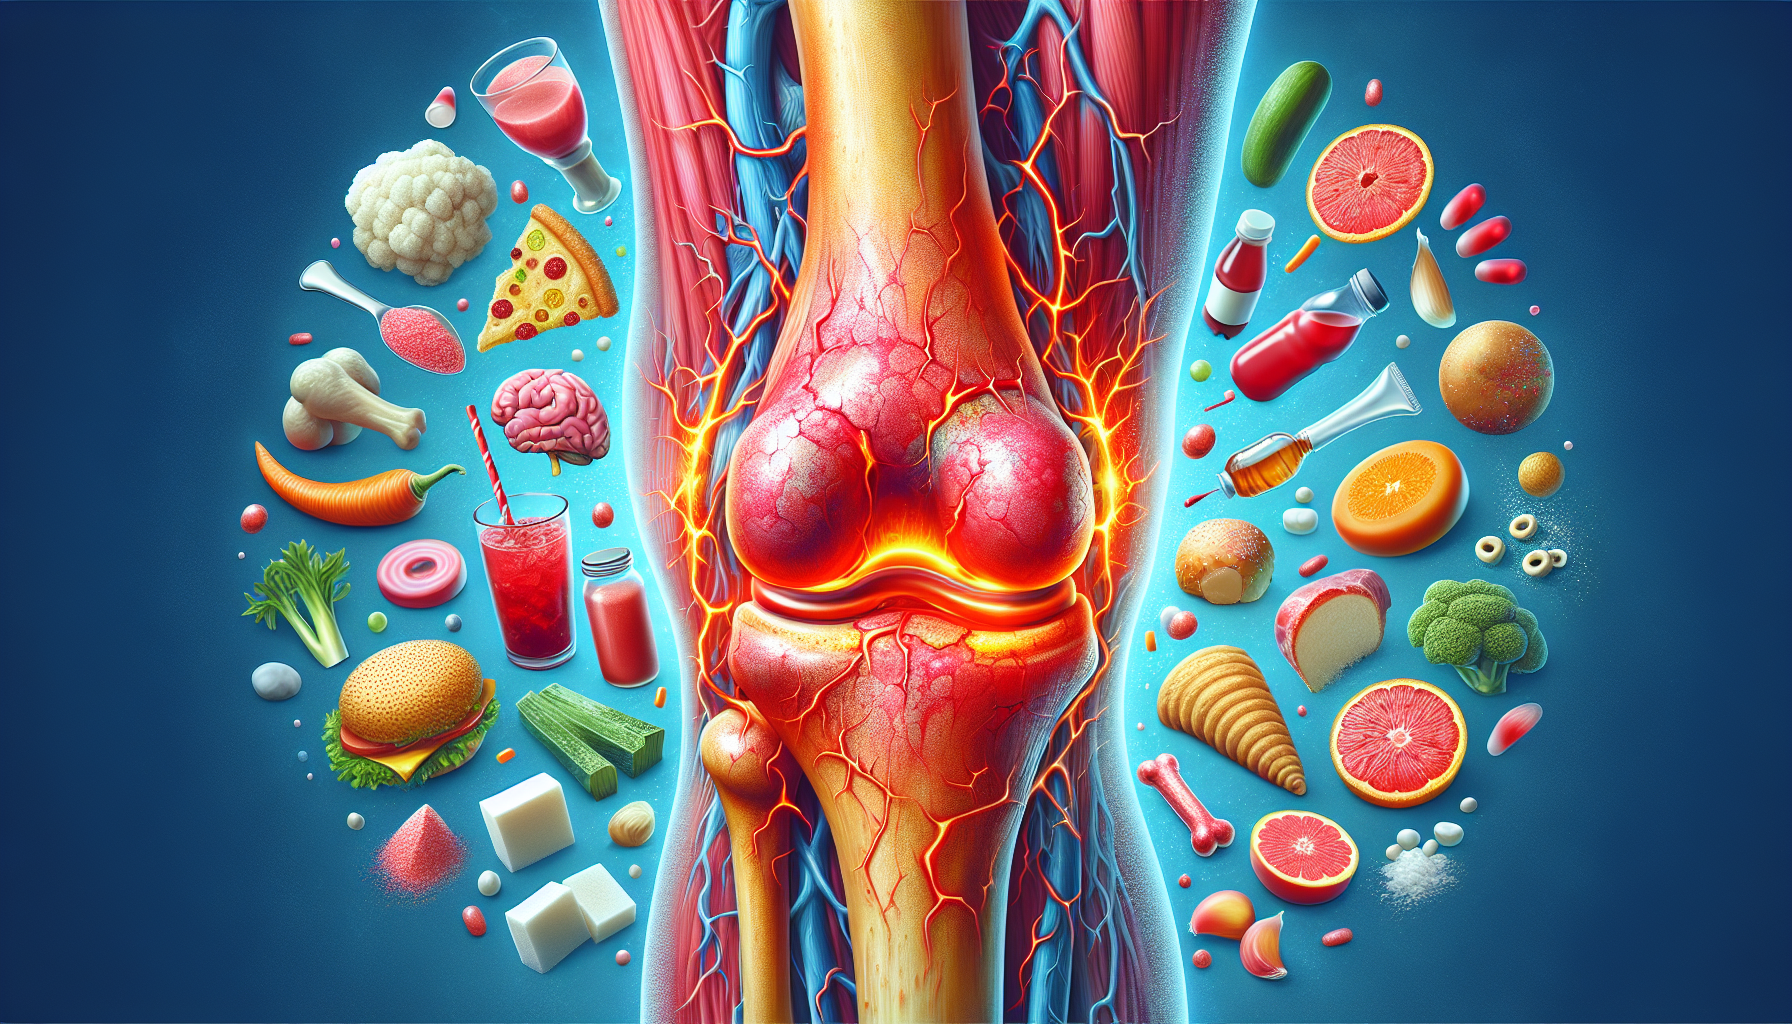 Can Unhealthy Eating Cause Joint Pain Or Inflammation?